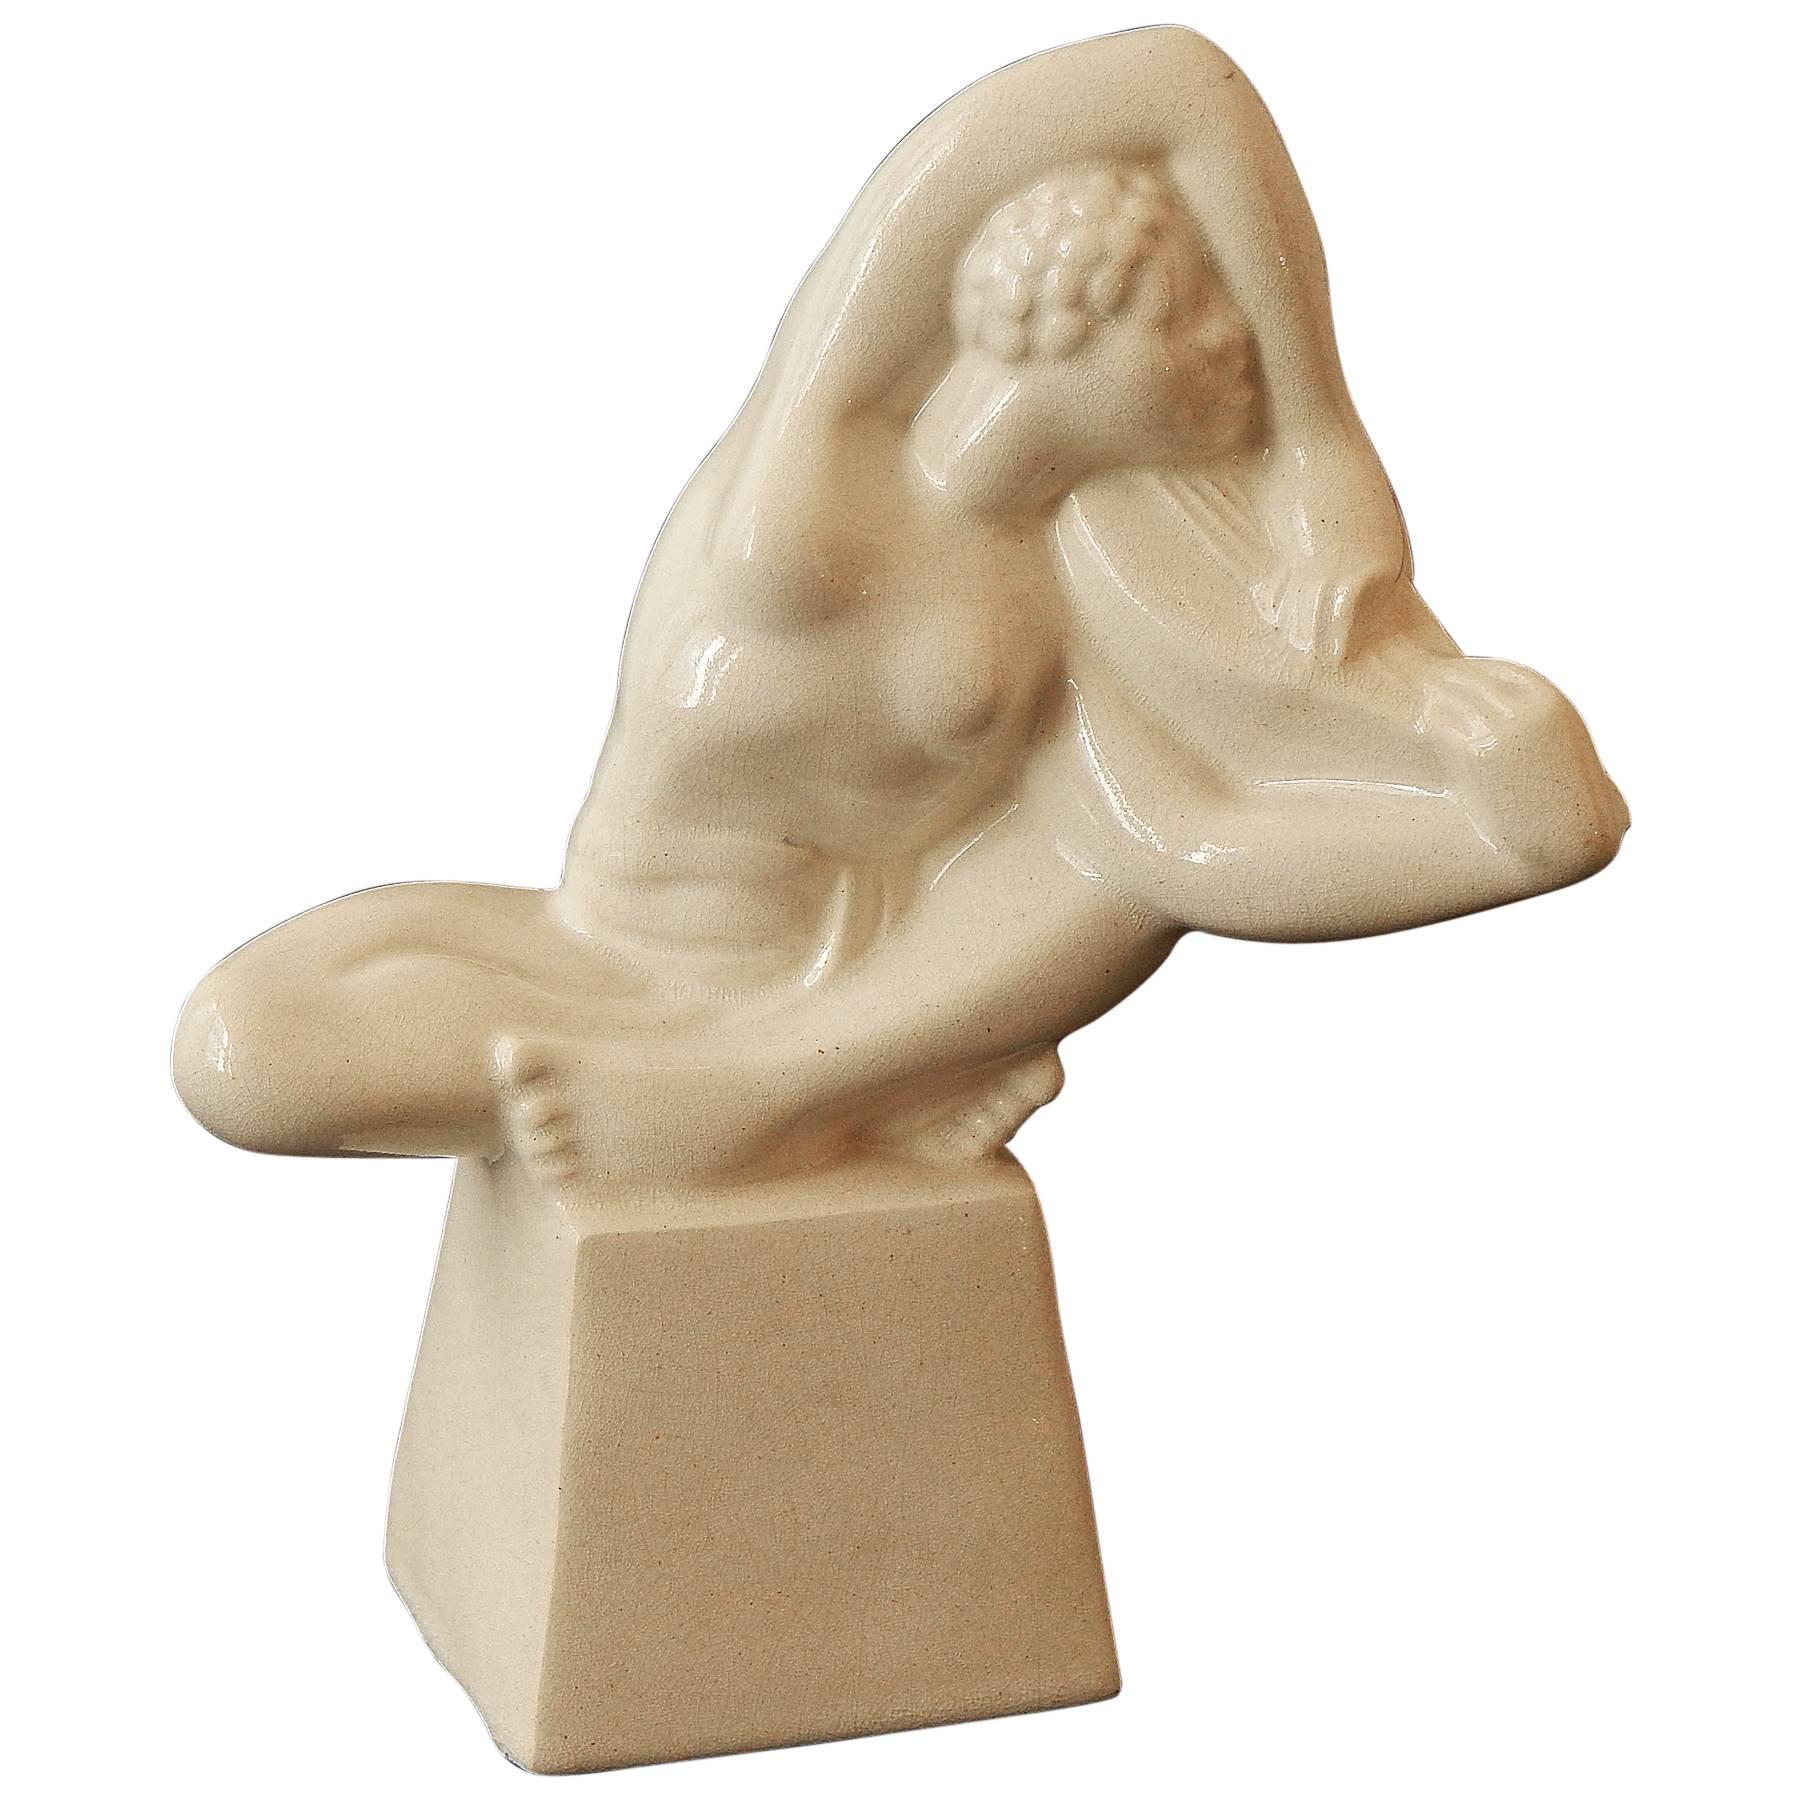 "African with Lute, " Rare Sculpture of Female Nude by Archipenko Student For Sale